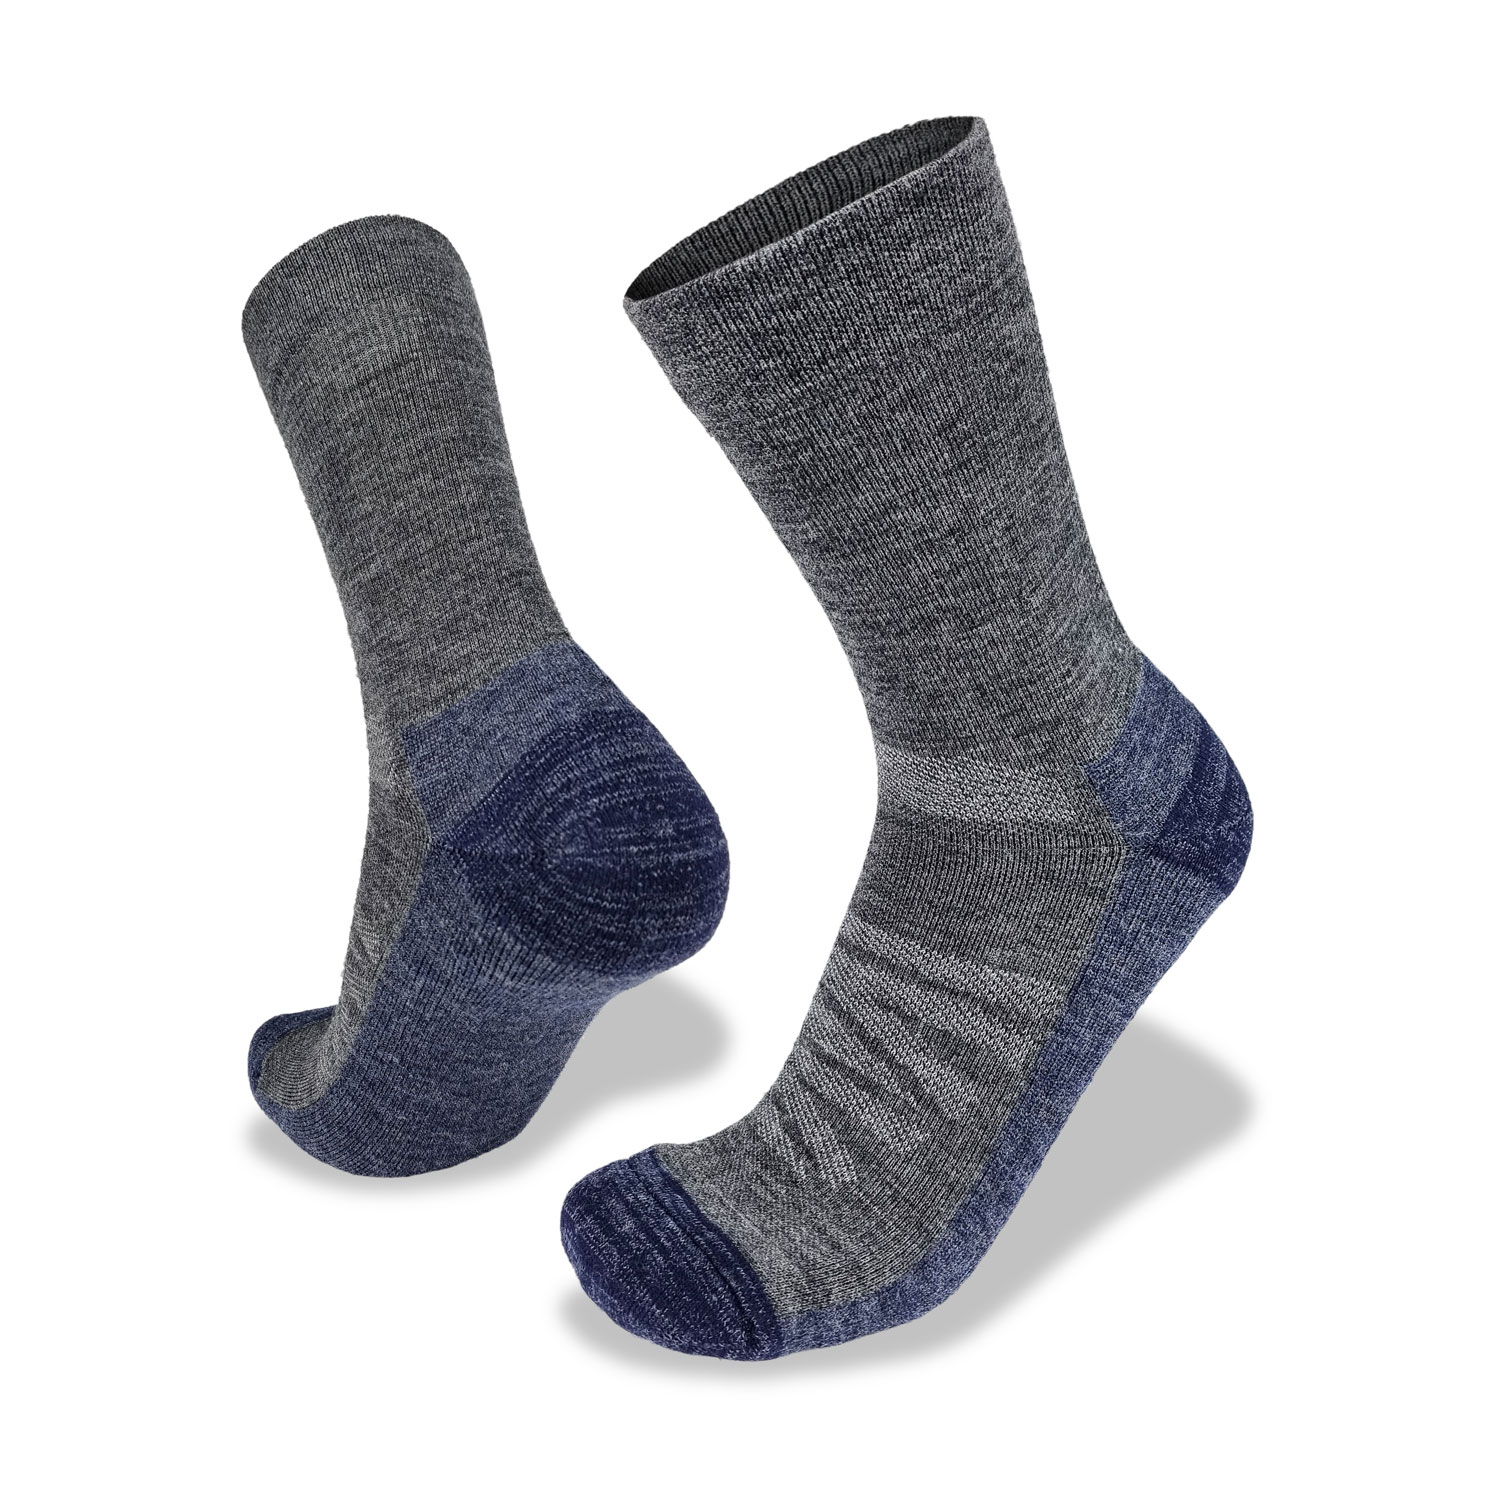 Cape to Cape Hiker Socks in Charcoal/Blue